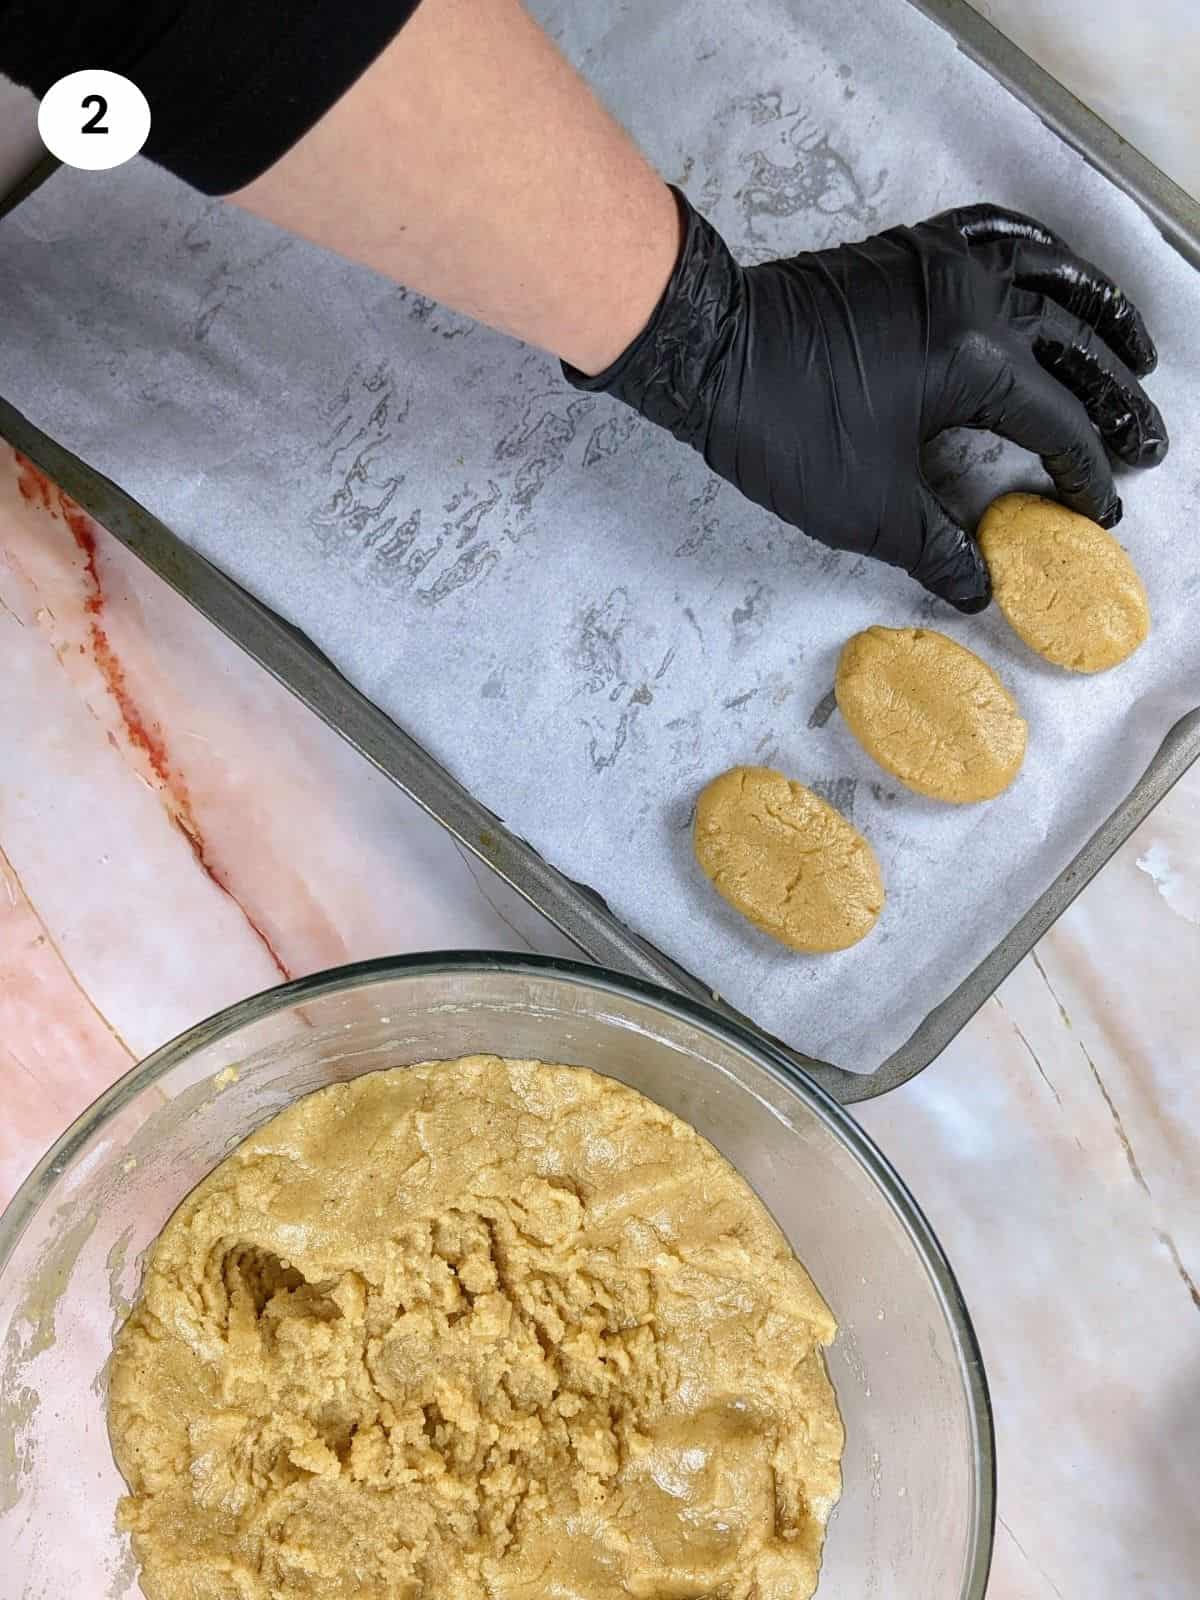 Placing the honey cookie on a lined baking tray.